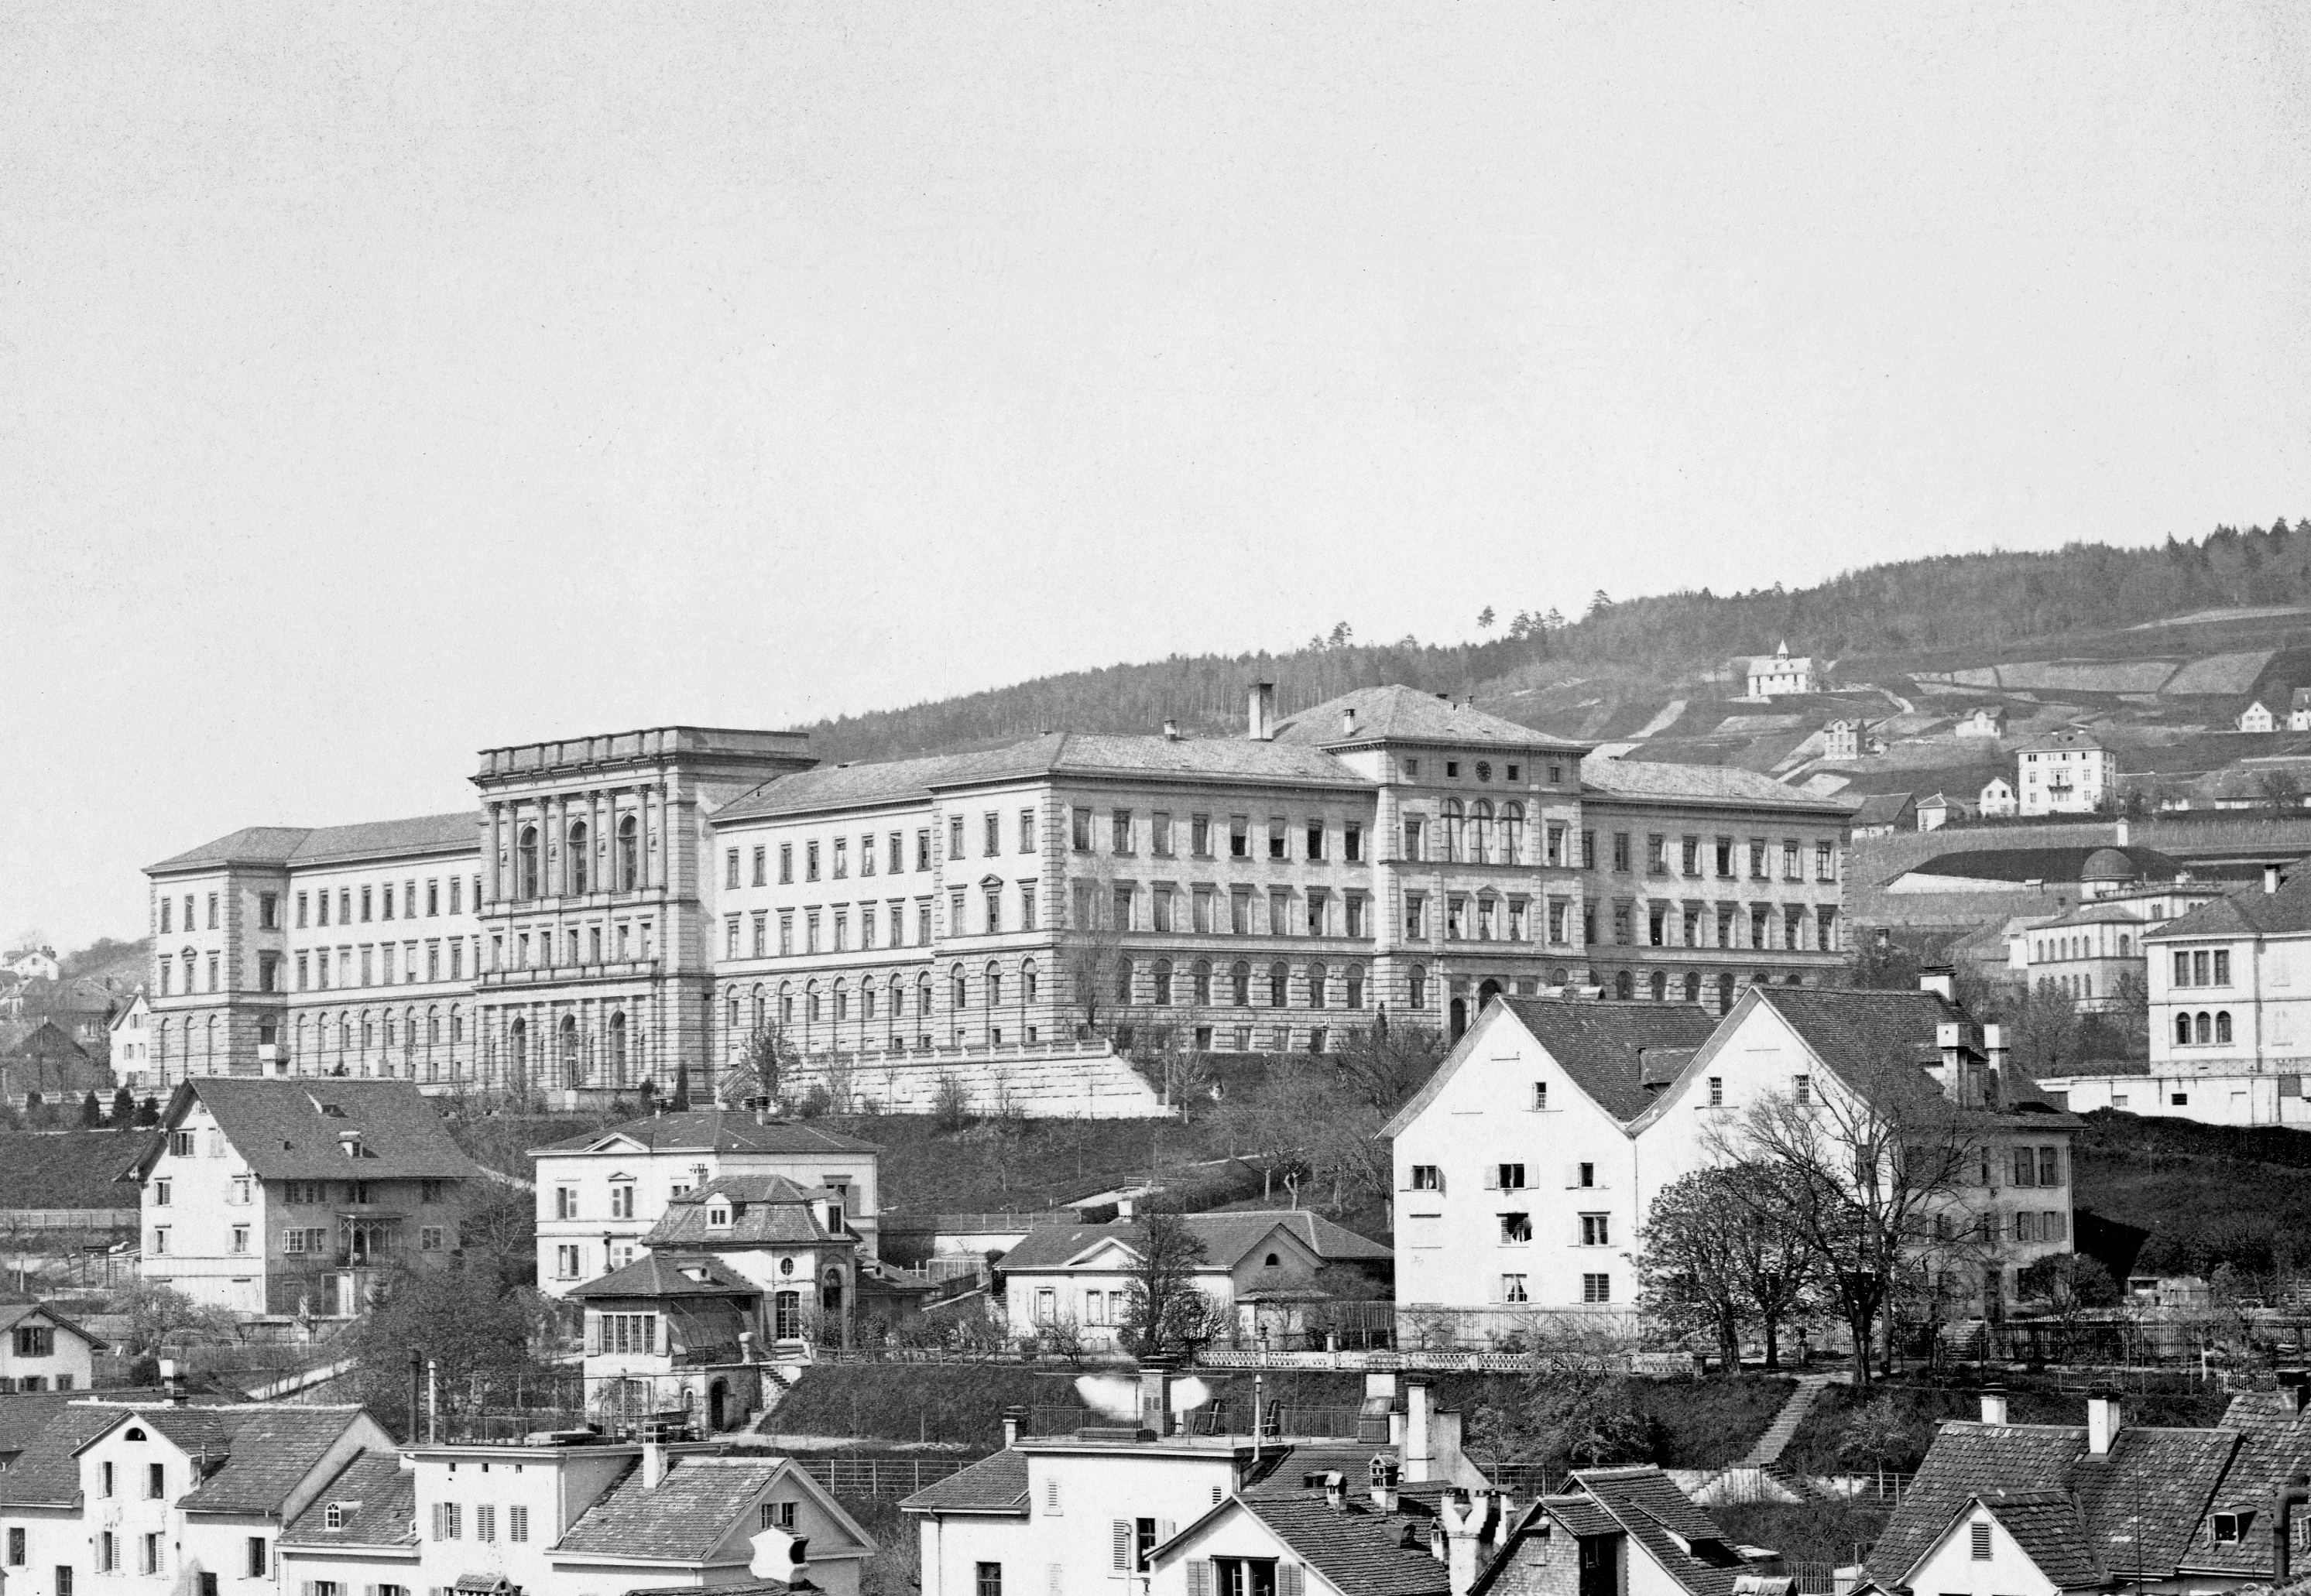 View of the then Federal Polytechnic Institute building around 1880